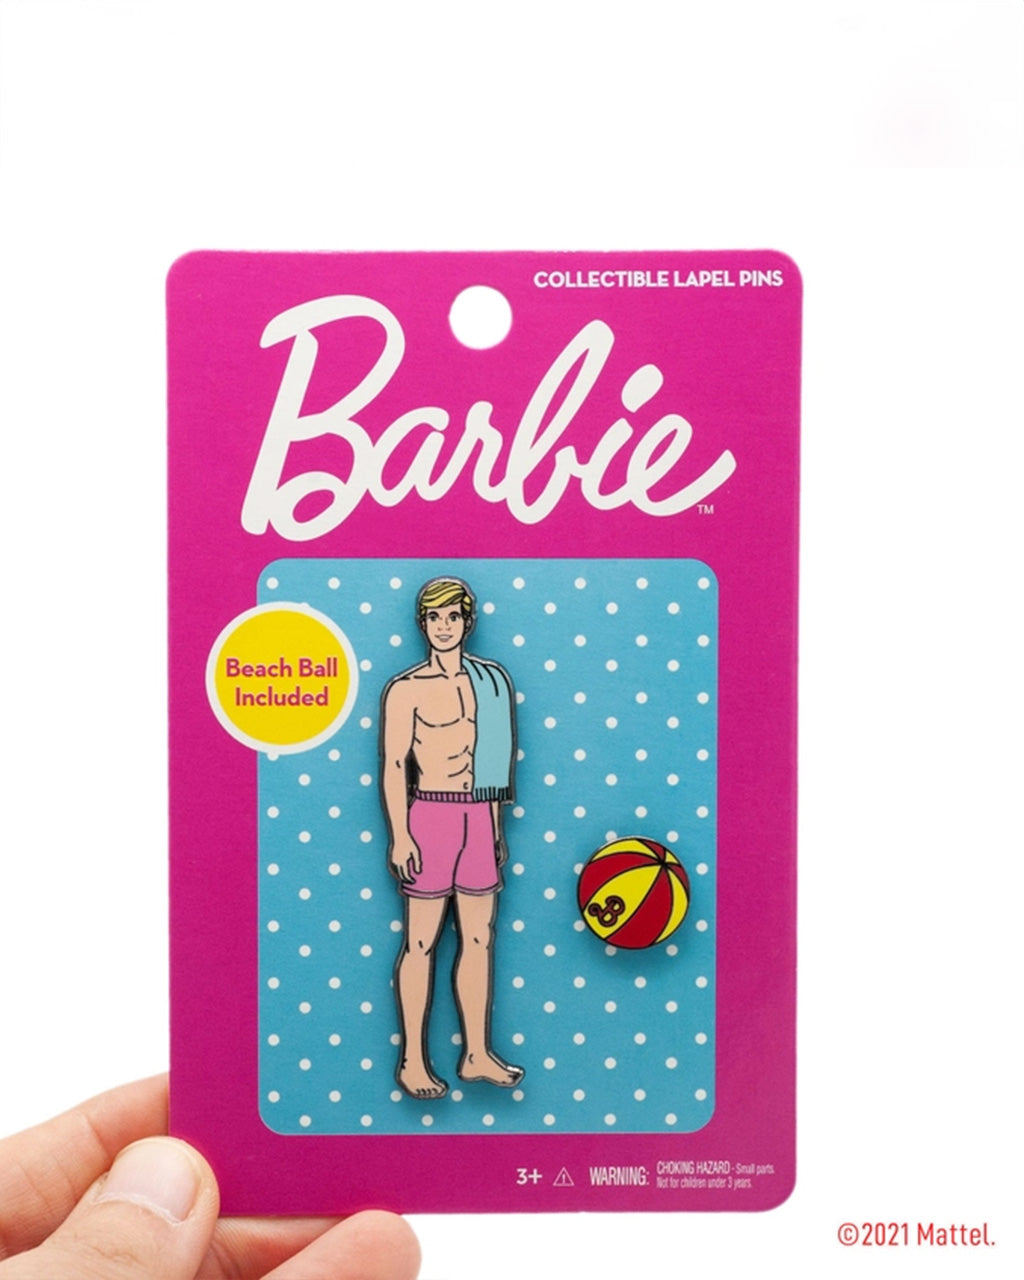 A hand holding a pin with a cartoon person in swimsuit

Description automatically generated